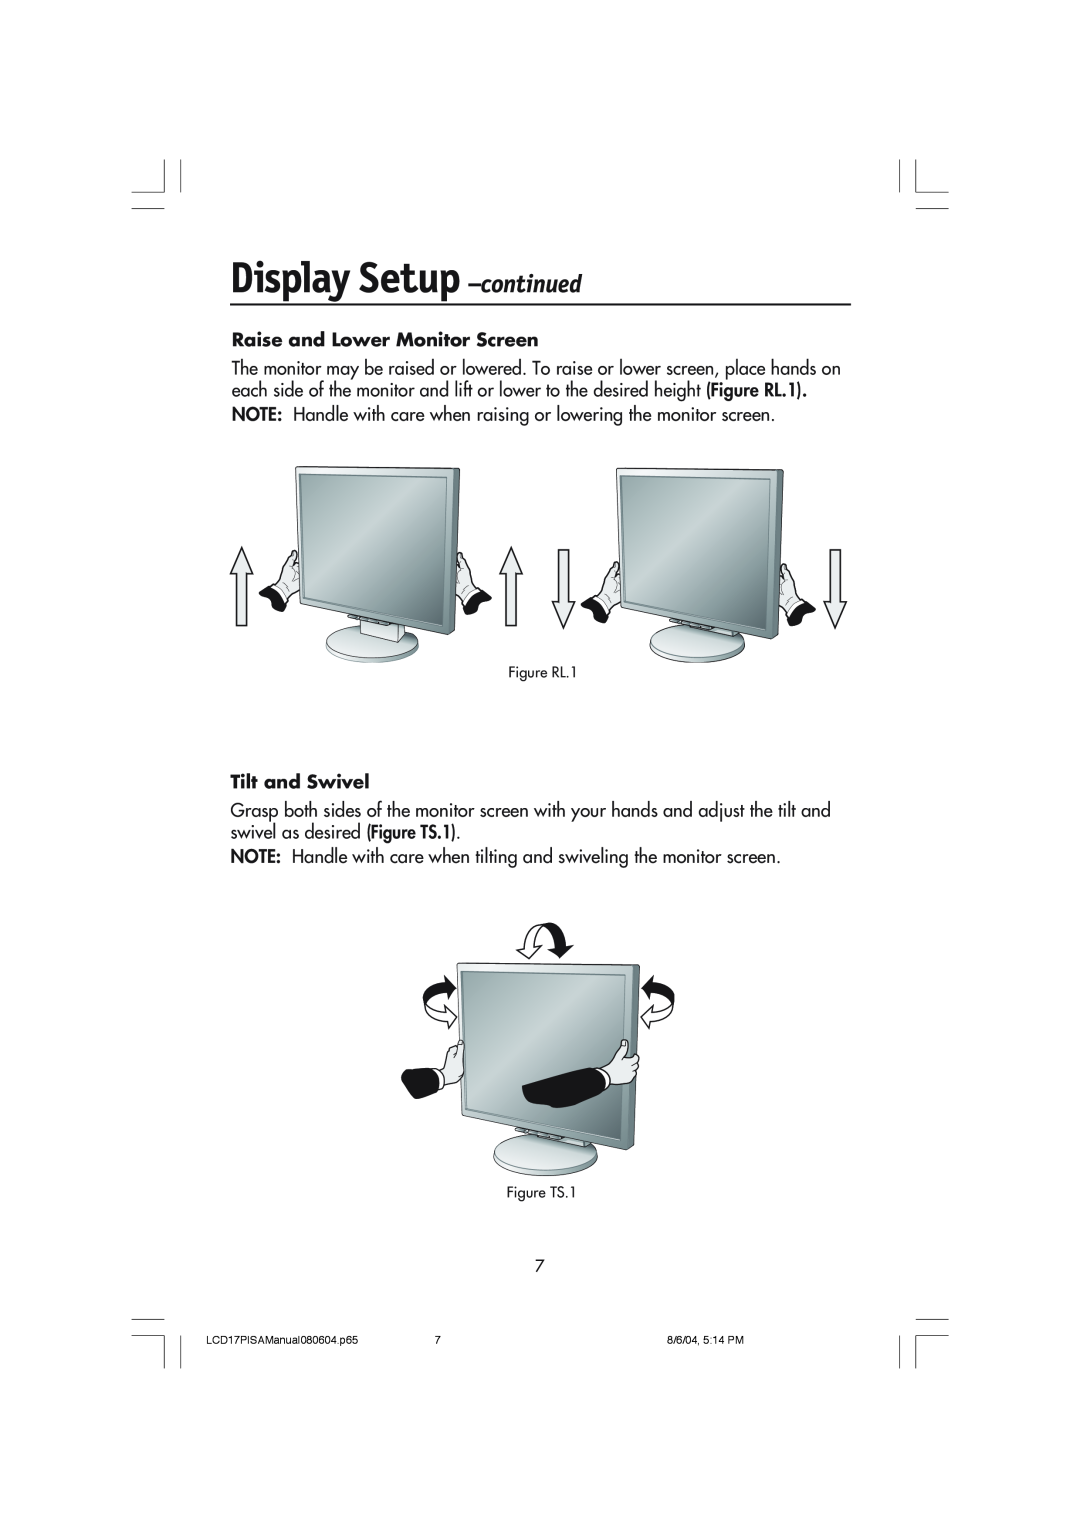 NEC LCD1770V, LCD1770NX, LCD1770NXM user manual Raise and Lower Monitor Screen, Tilt and Swivel, Display Setup -continued 